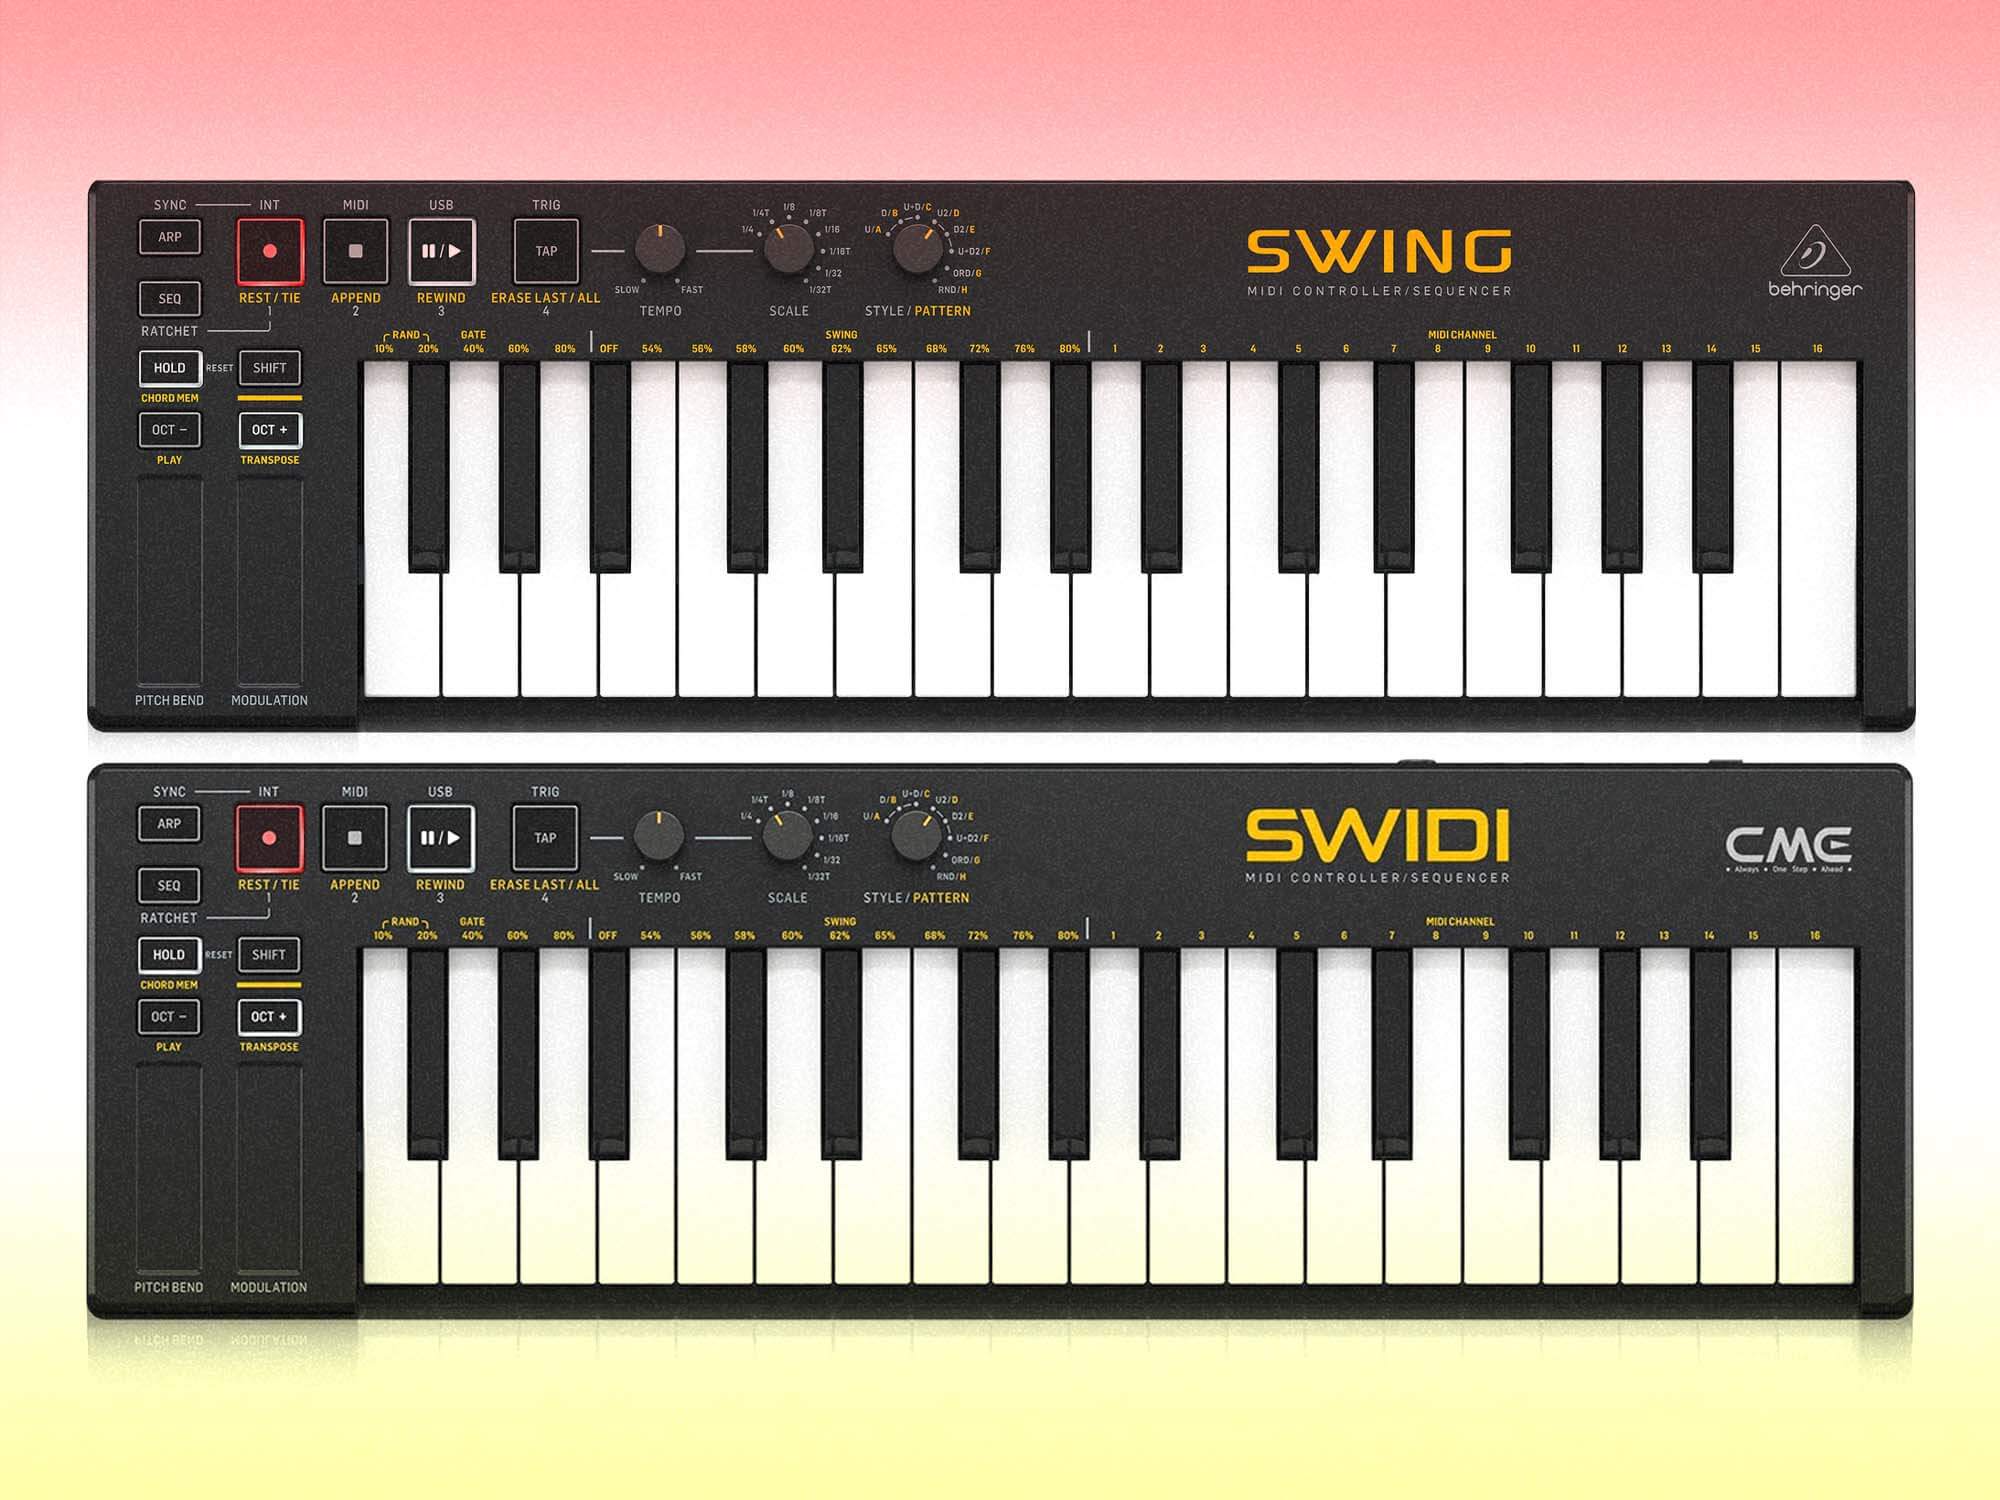 CME Swidi and Behringer Swing